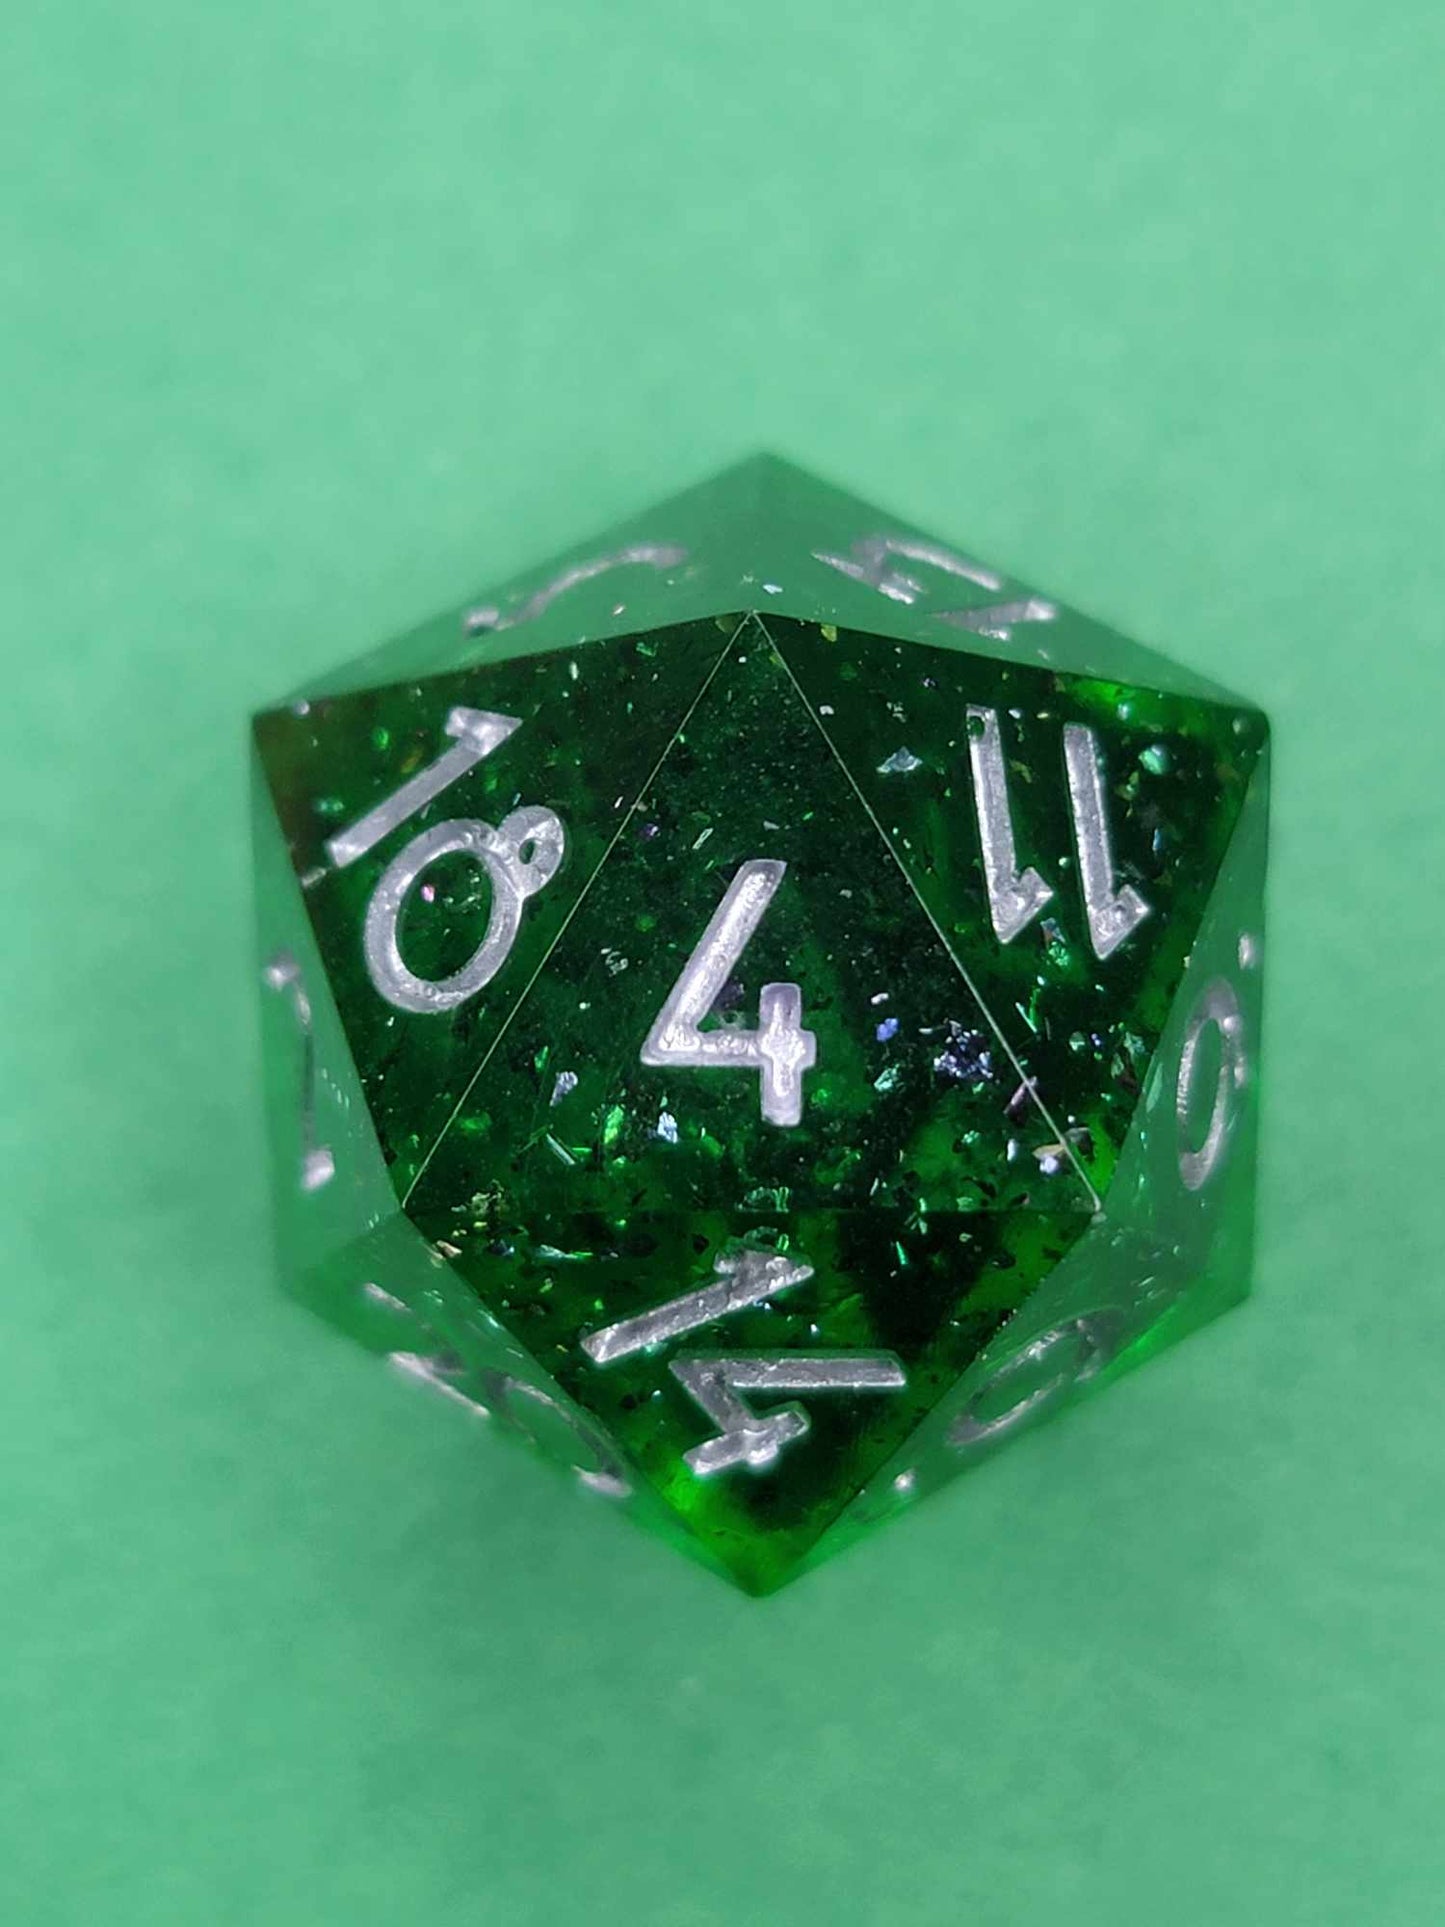 Deep in the Fores - Single D20 D&D Dice| Hand Crafted Dungeons and Dragons Dice